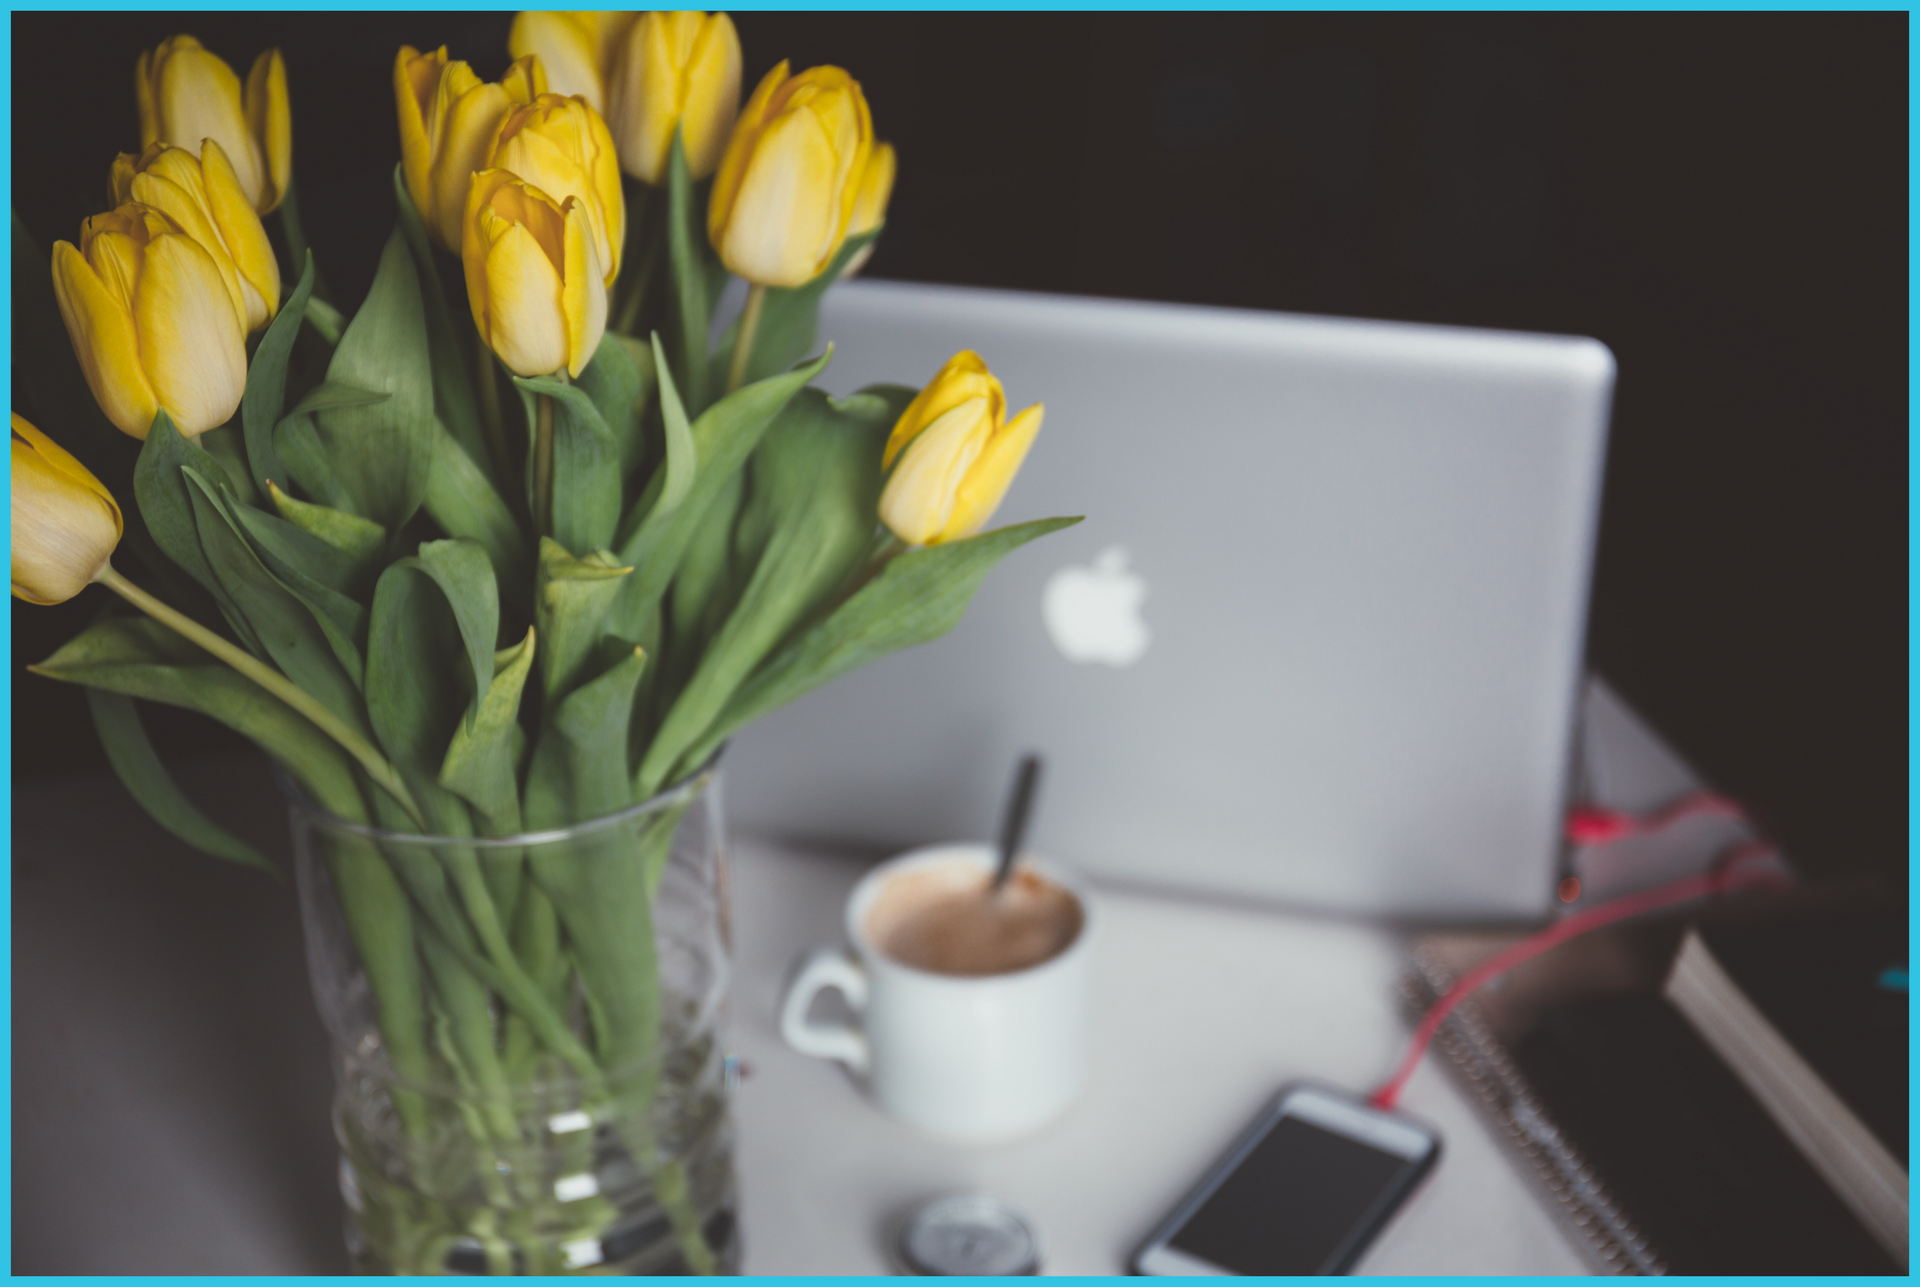 A vase of yellow tulips sits on a table next to a laptop and a cup of coffee.